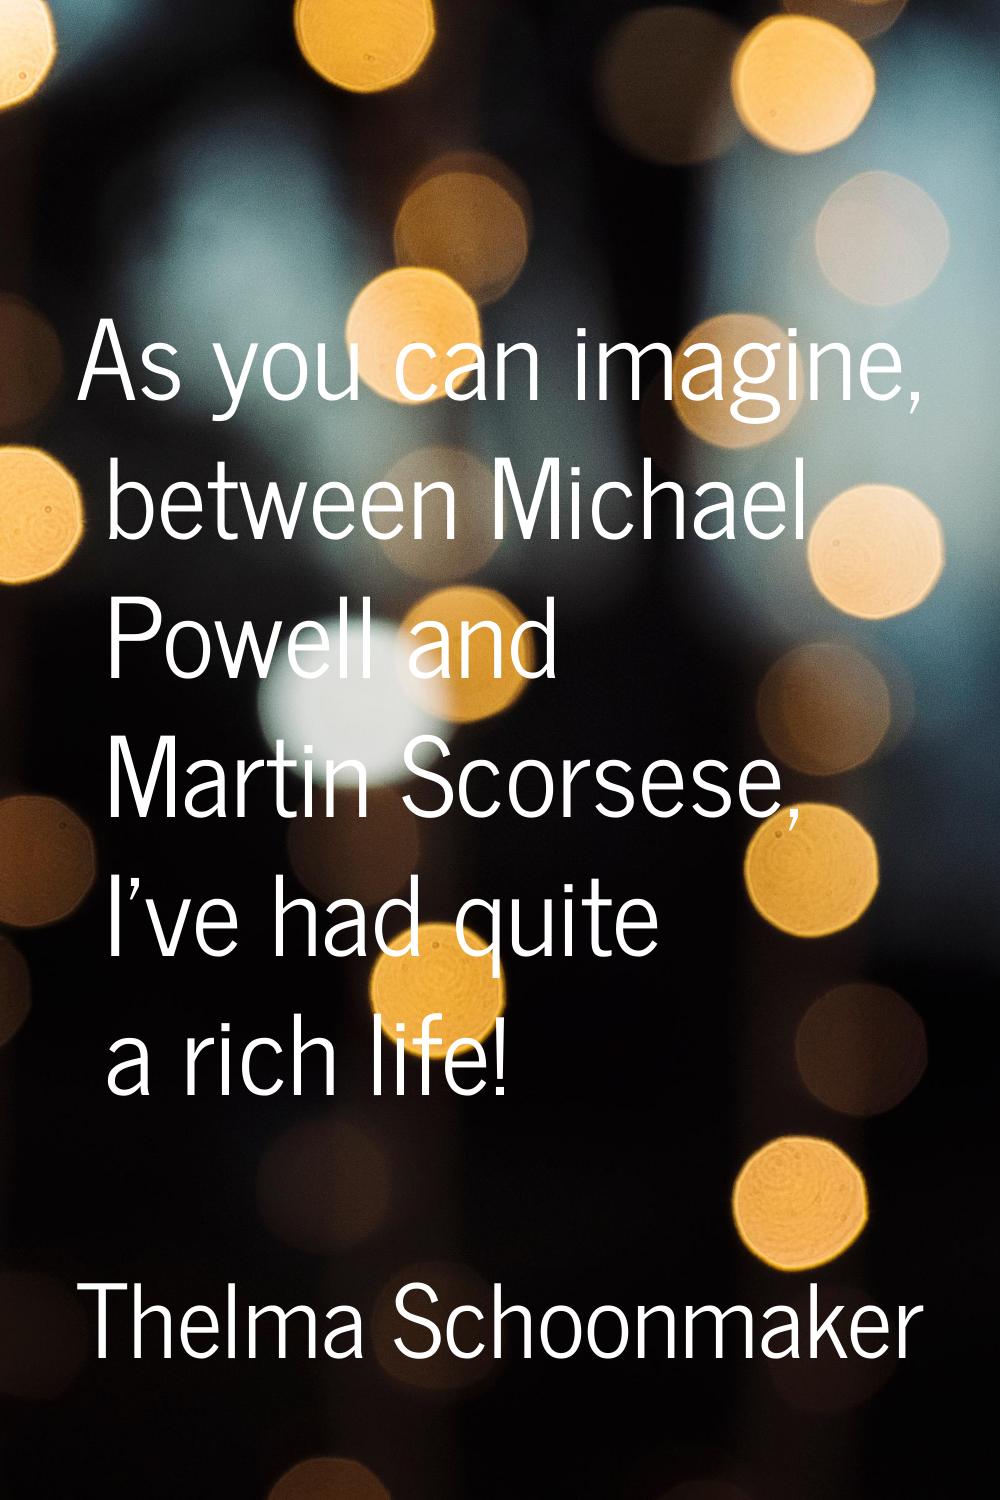 As you can imagine, between Michael Powell and Martin Scorsese, I've had quite a rich life!